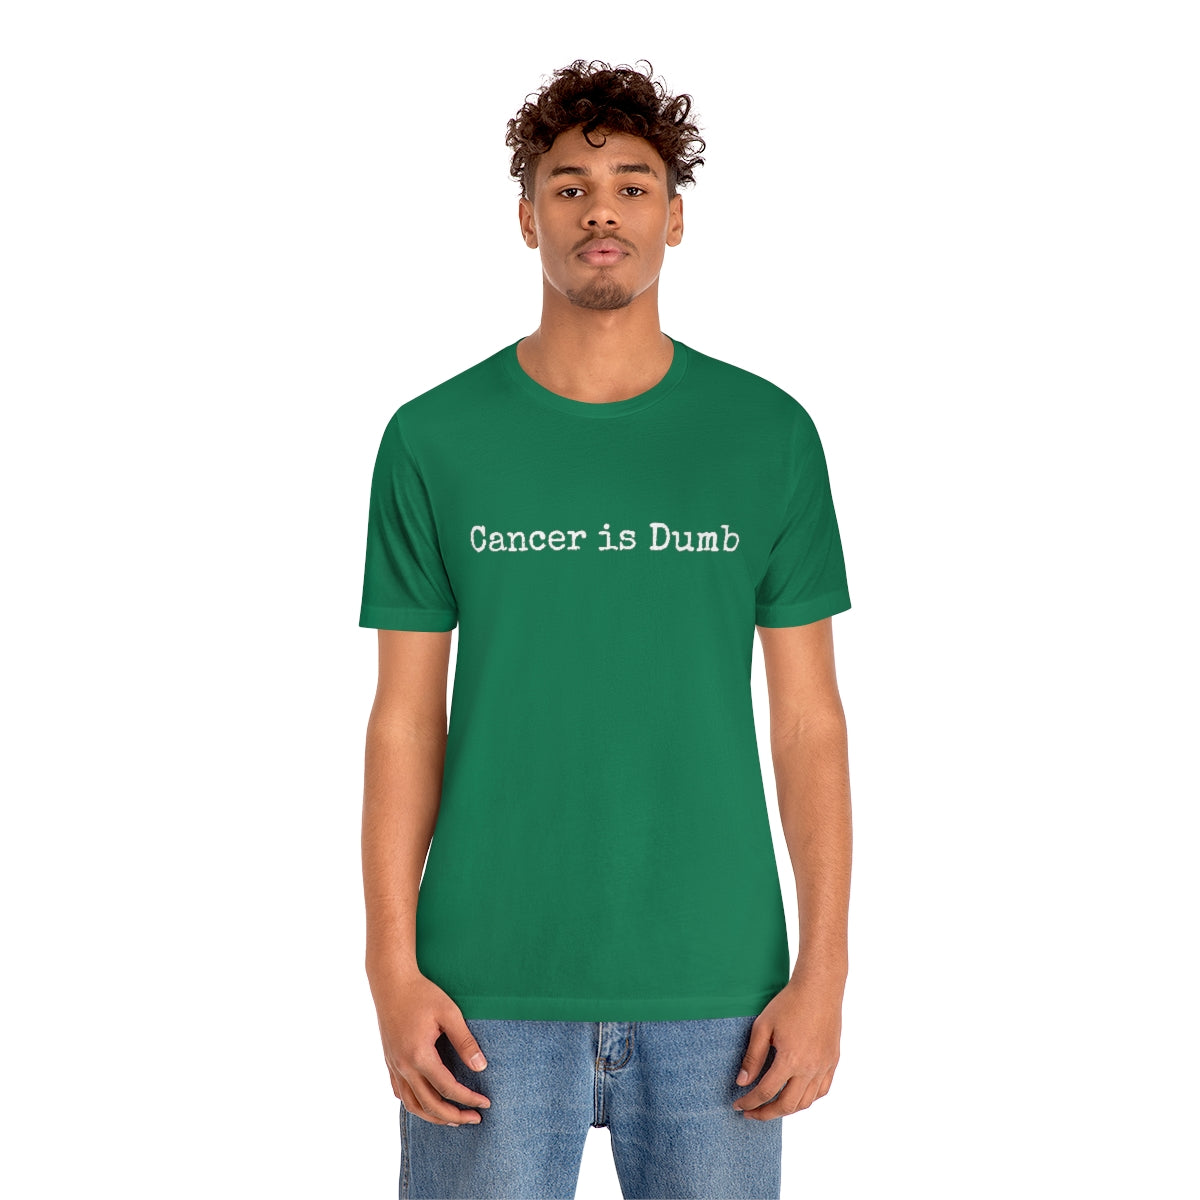 Unisex Jersey Short Sleeve Tee T Shirt tshirt Mens Womens Apparel Clothing Anti Cancer Cancer is Dumb Survivor Support Humorous F